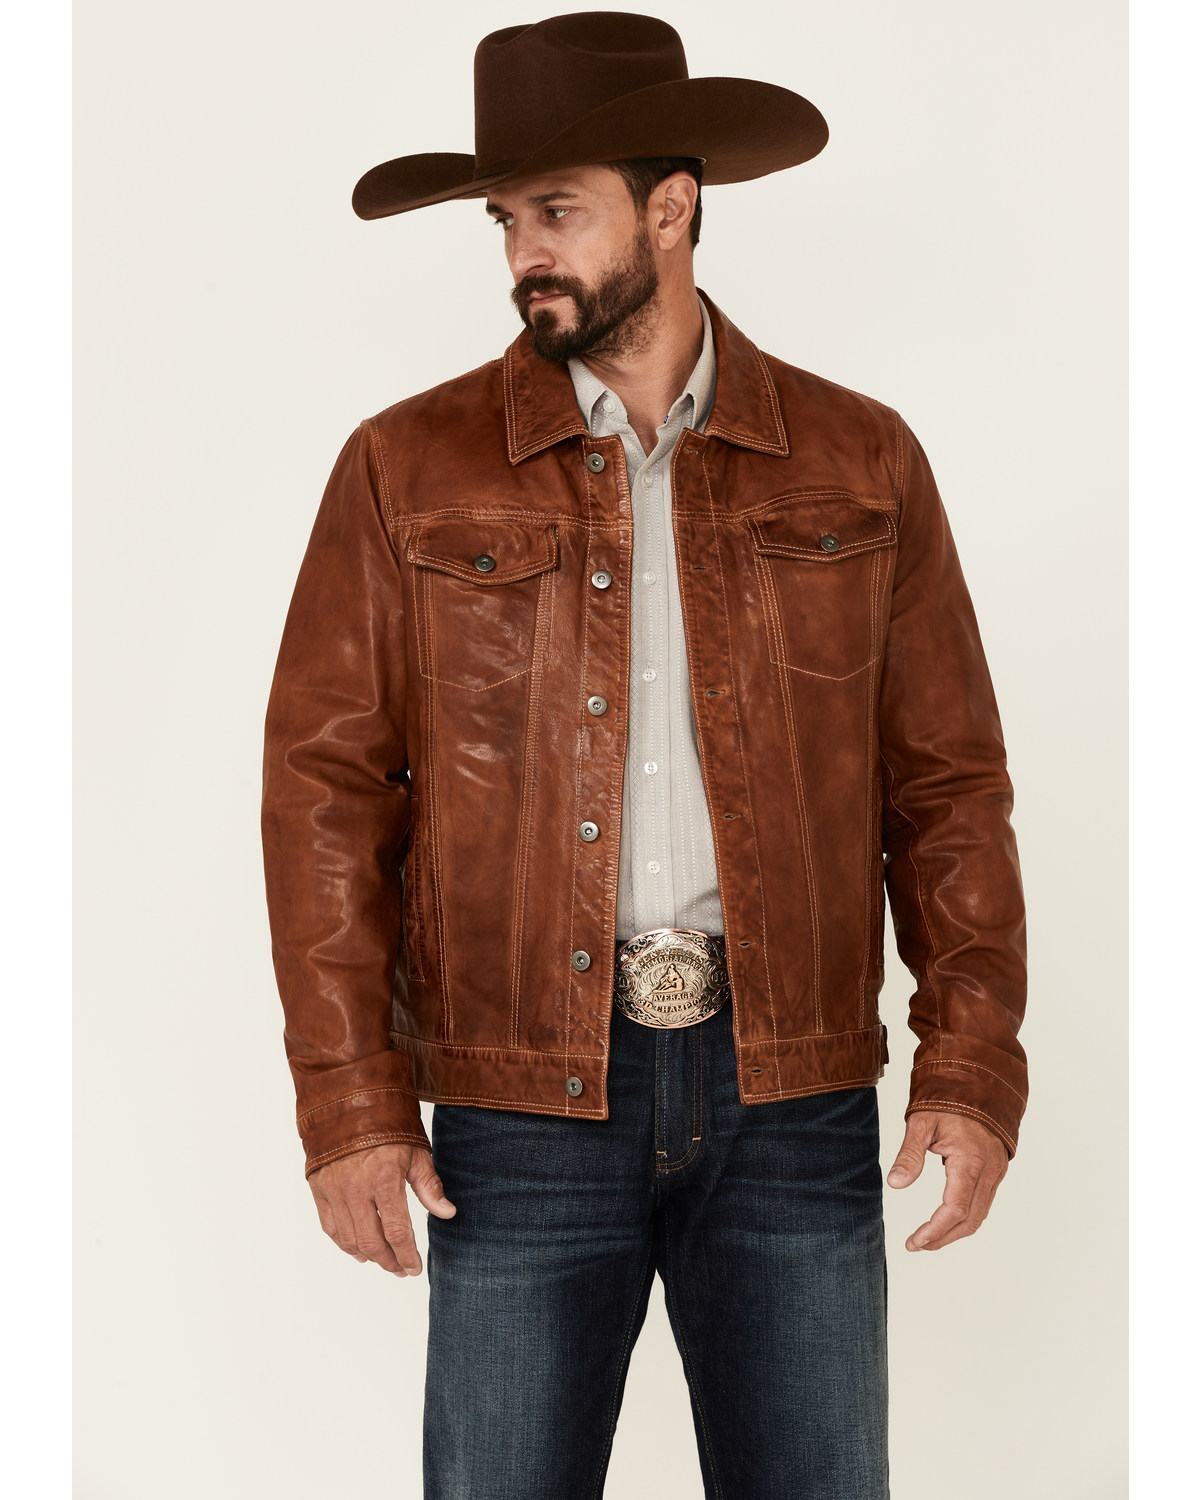 Scully Men's Tan Leather Button-Front Trucker Jacket